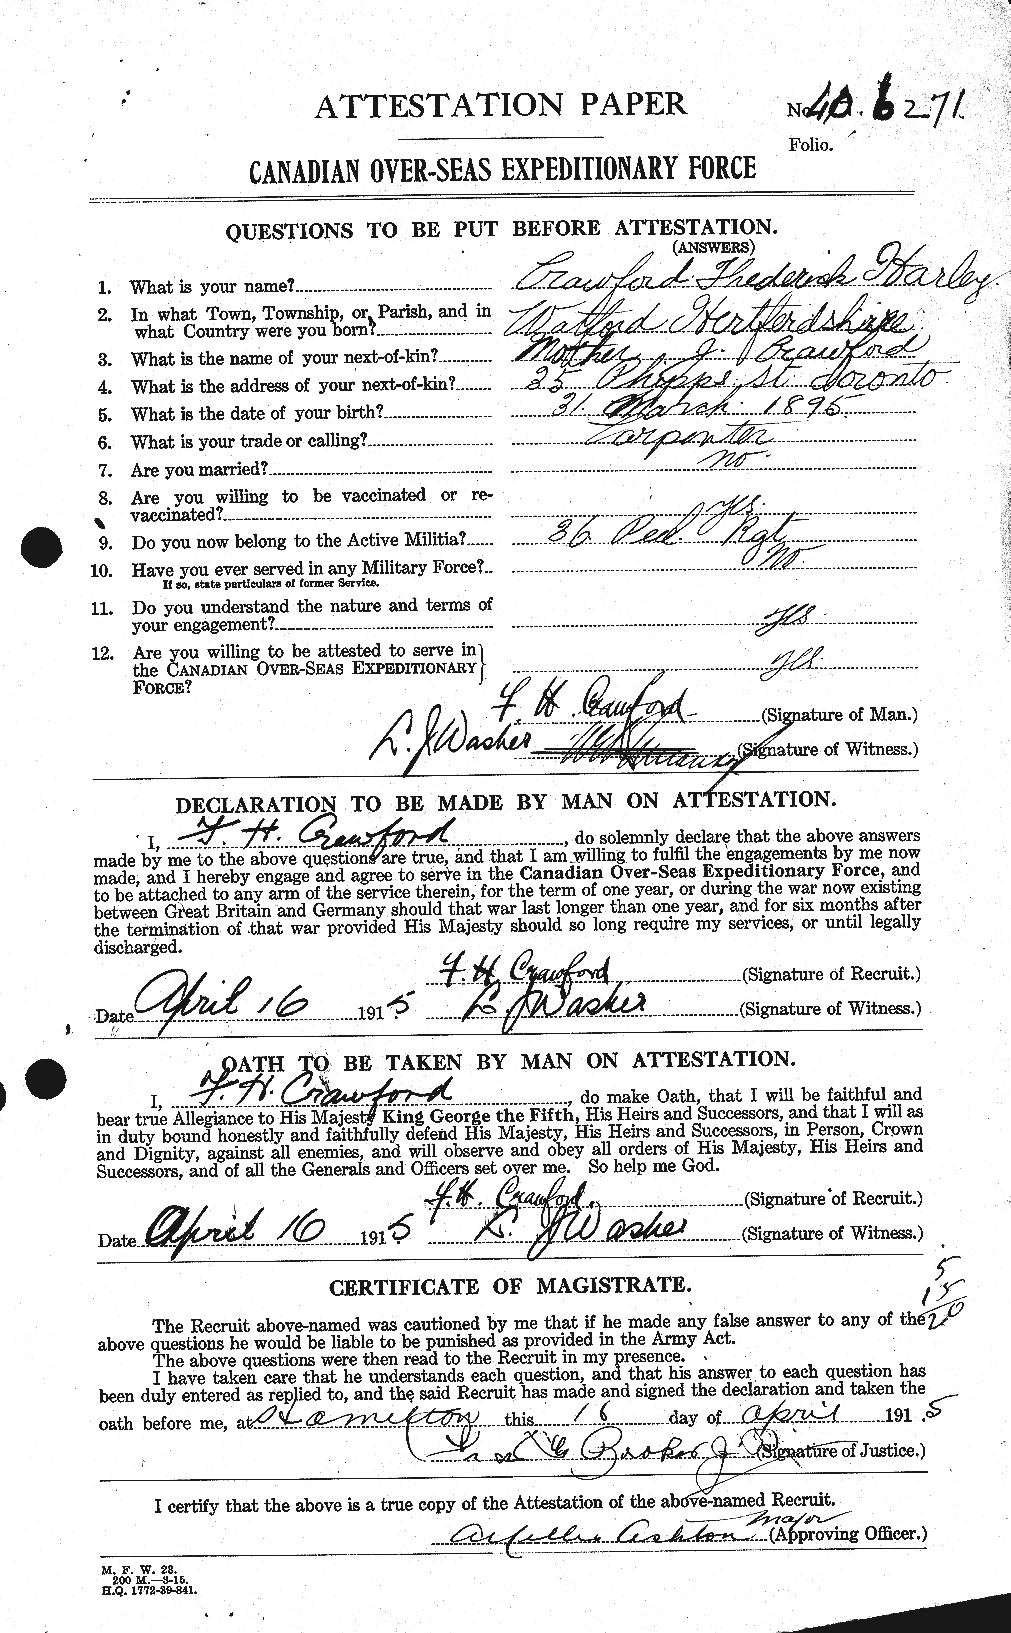 Personnel Records of the First World War - CEF 060724a